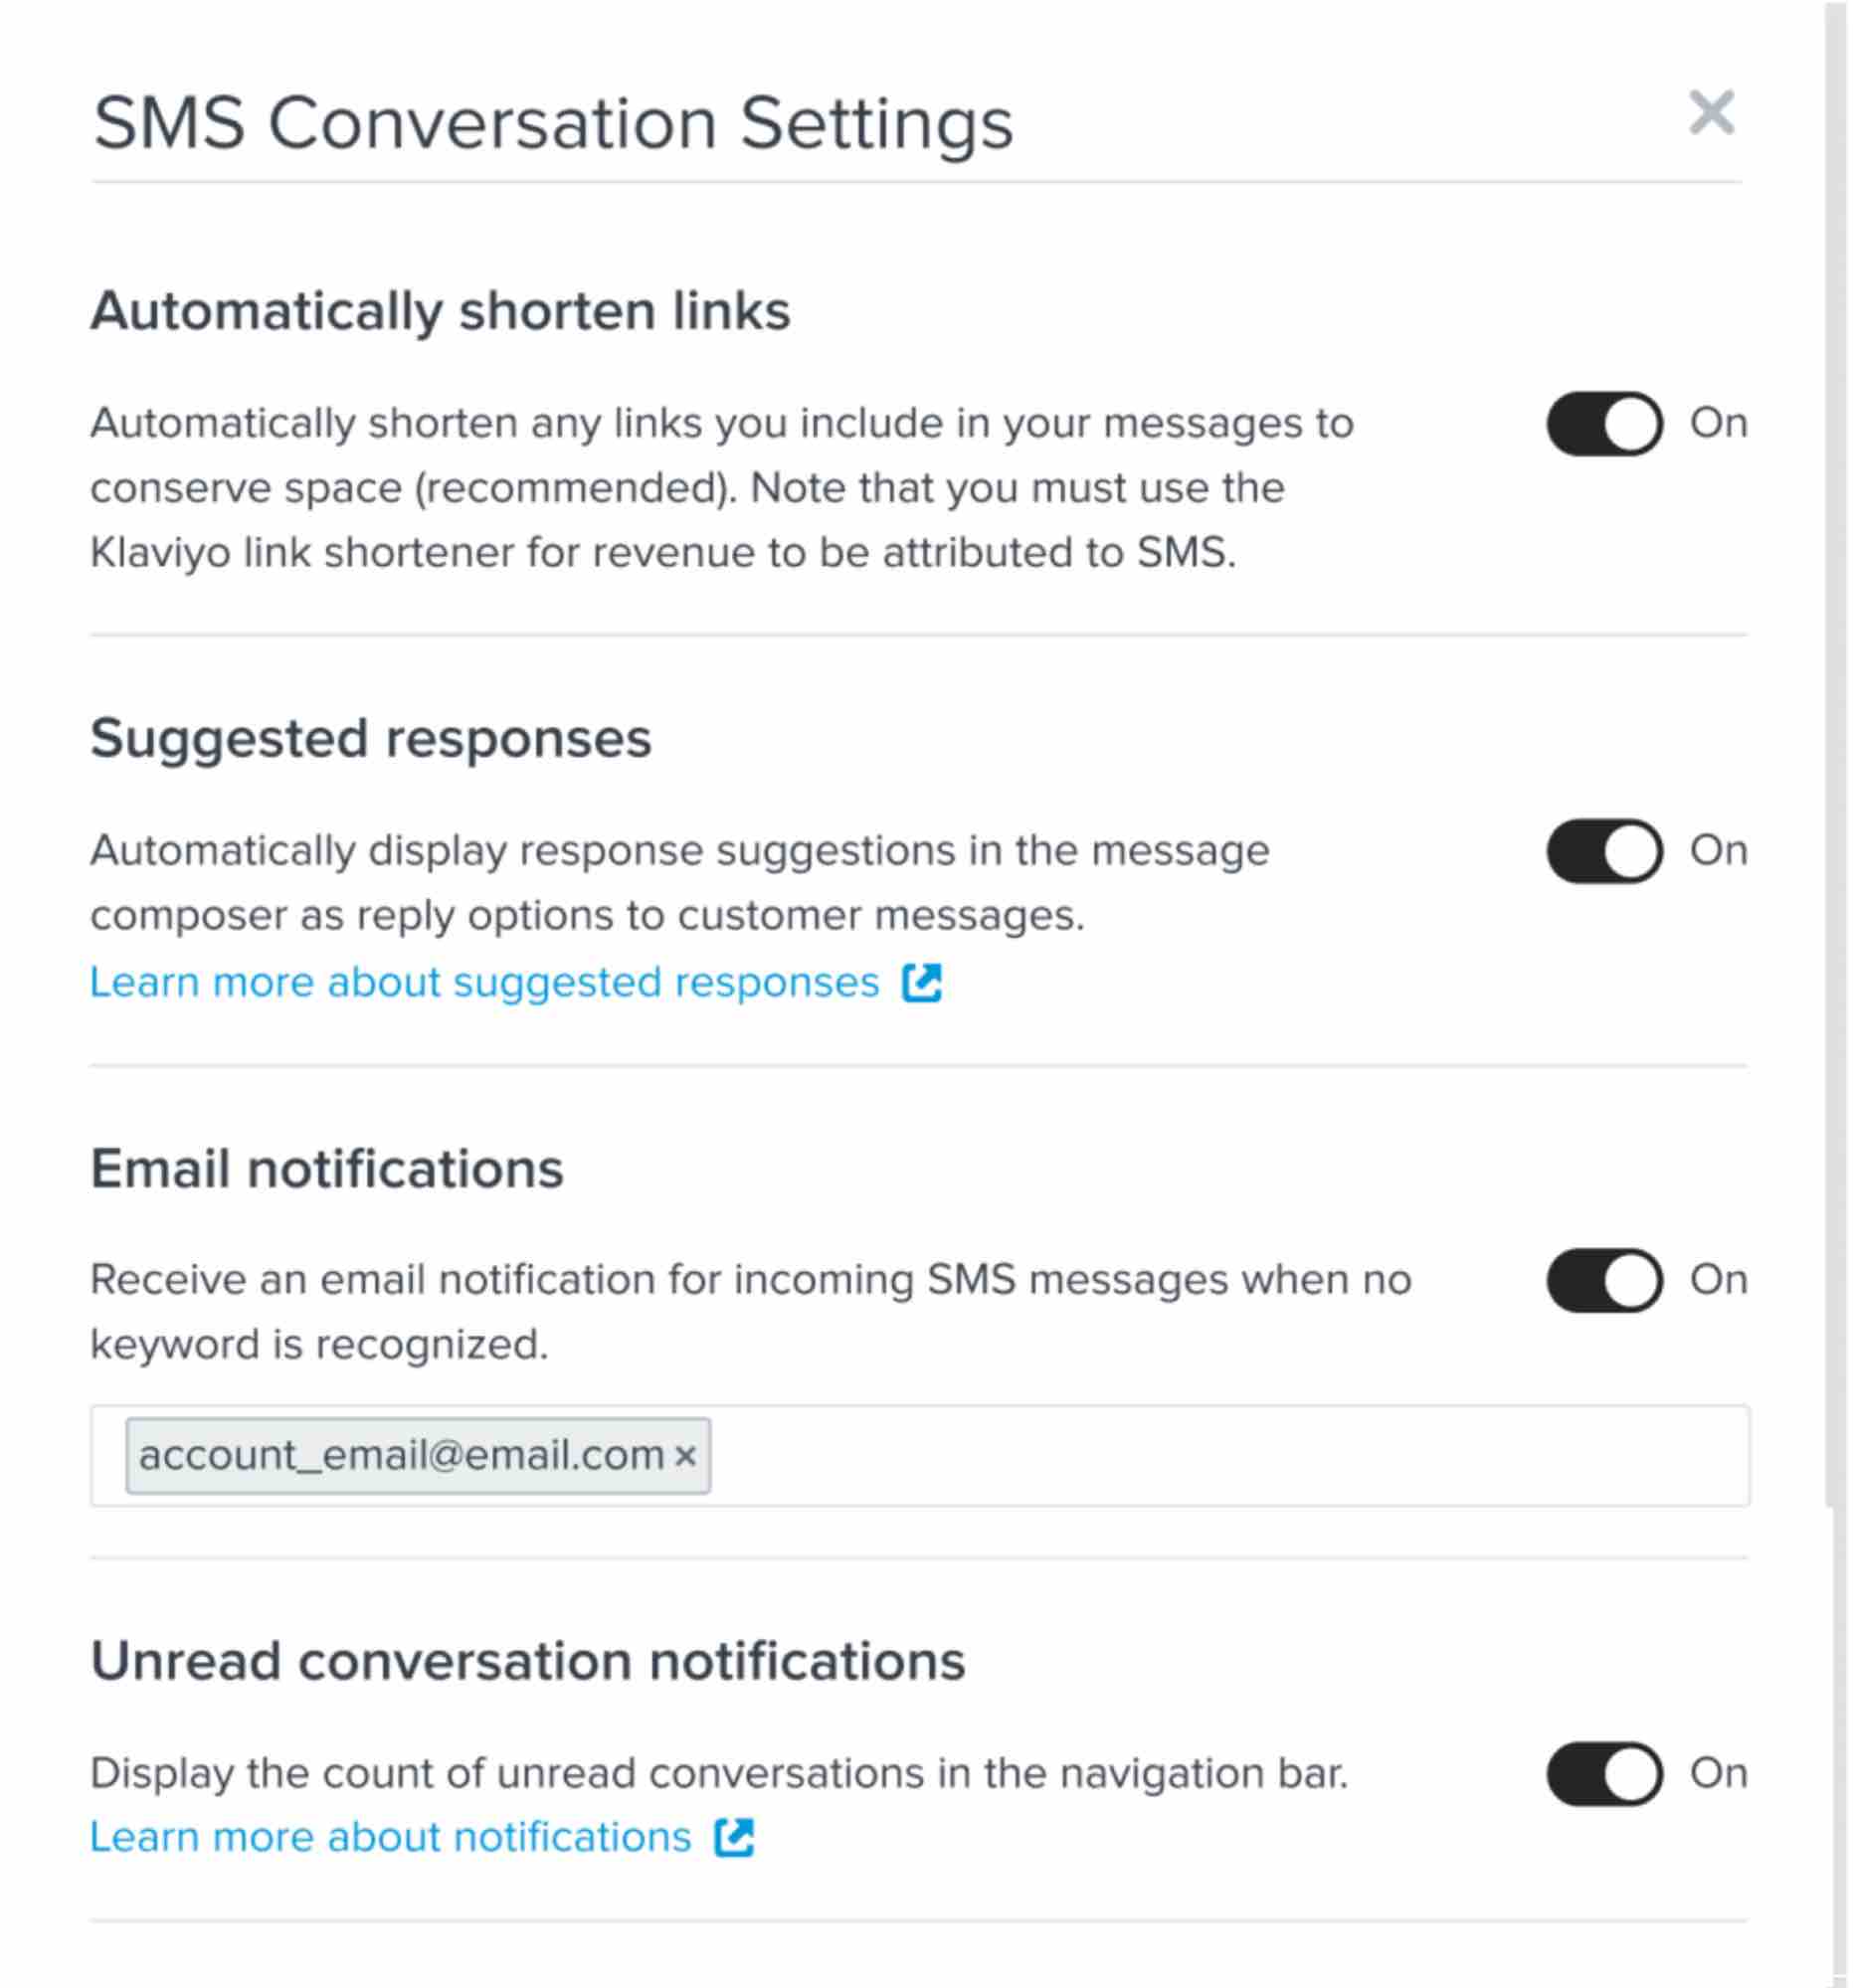 All SMS conversation settings, including the notifications